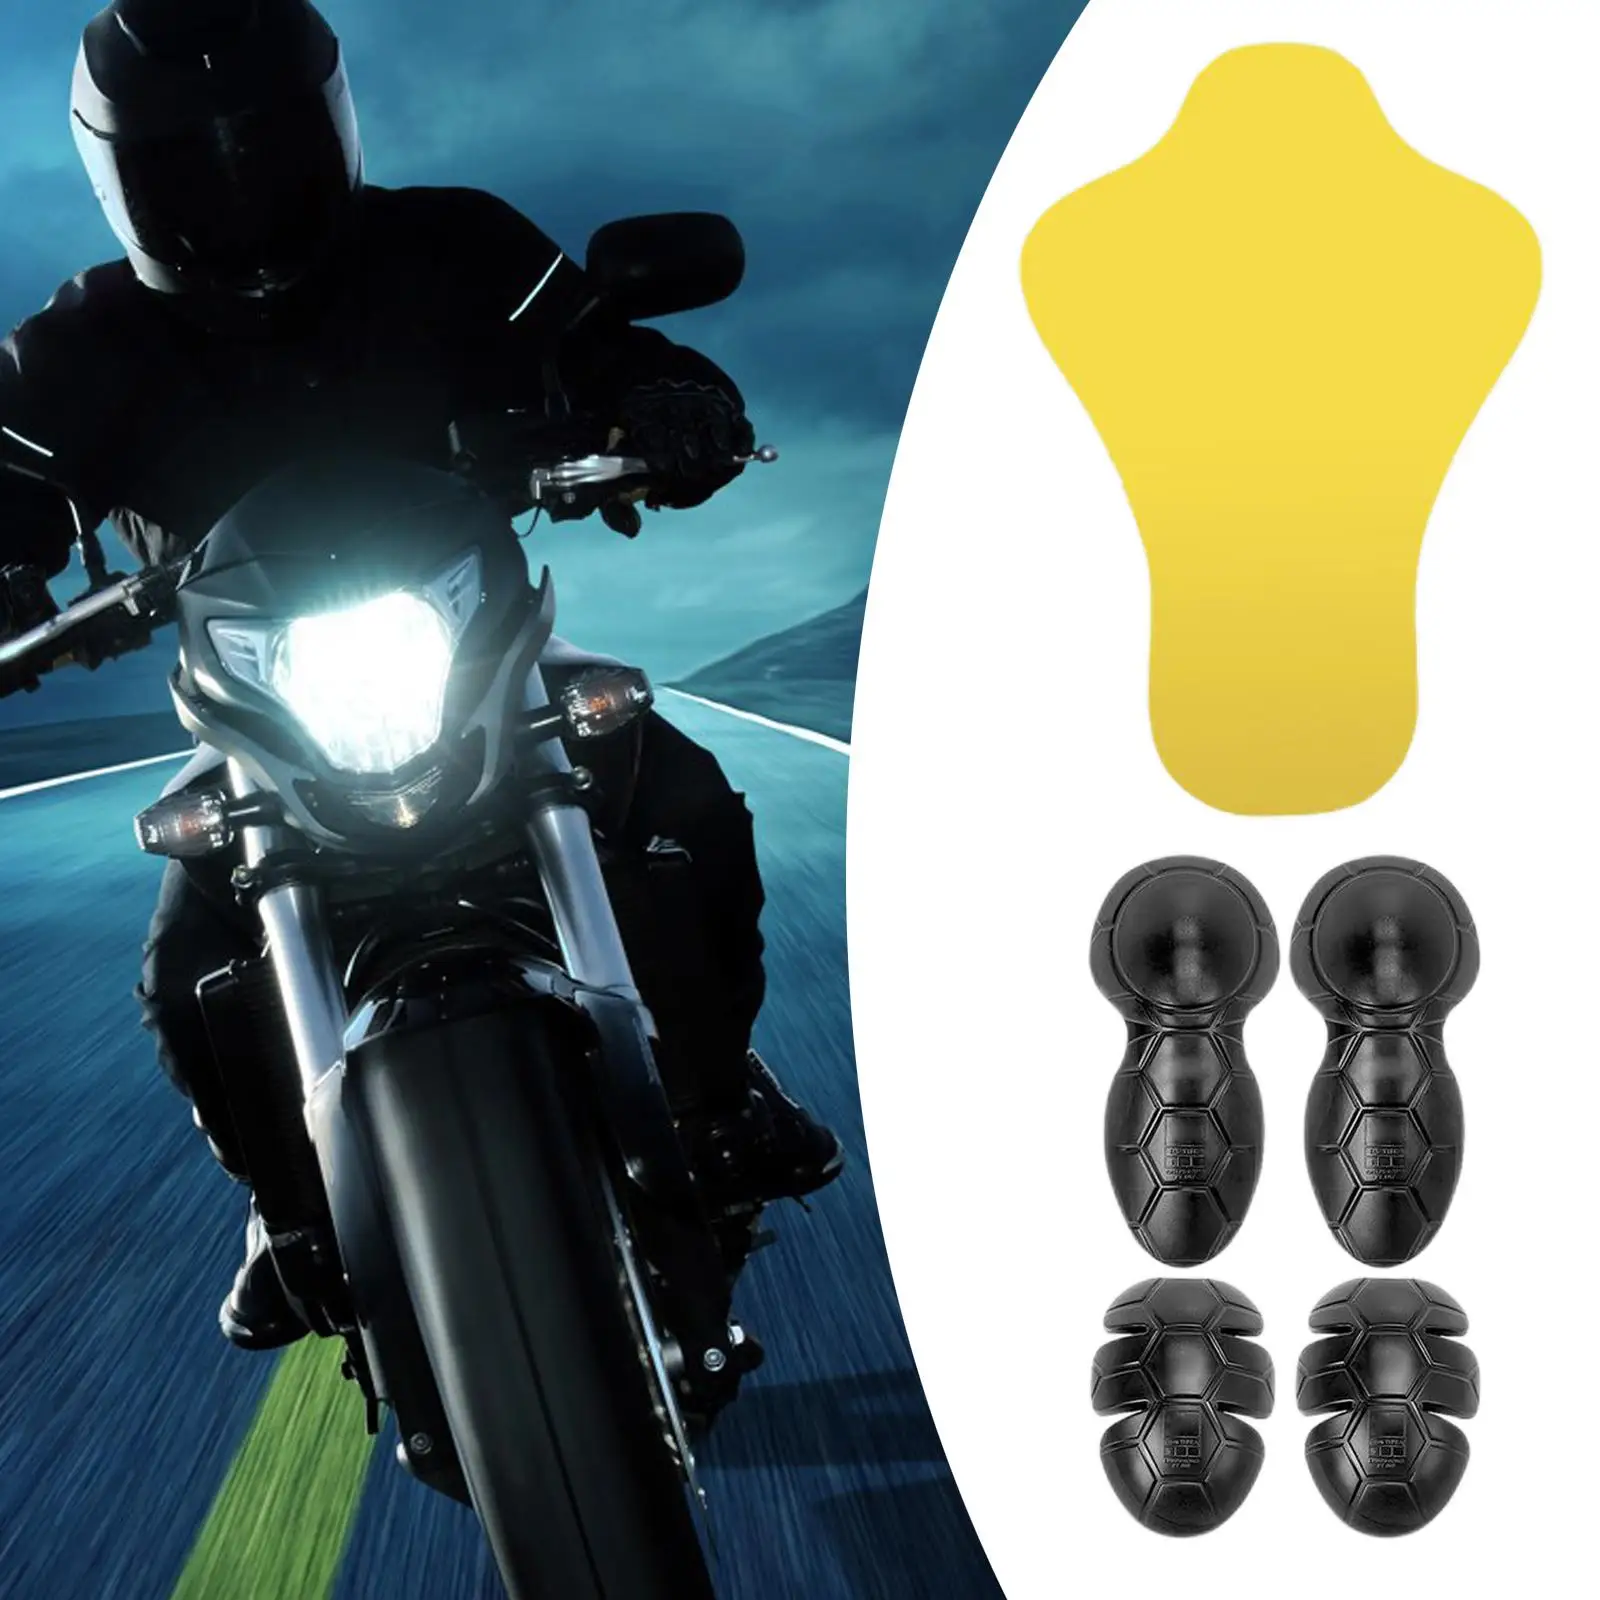 5Pcs Motorcycle Armor Armor Pad Armour Insert Protector Set Pads Guards Jacket Shoulder Elbow Back Chest Protector Pads Pads Set